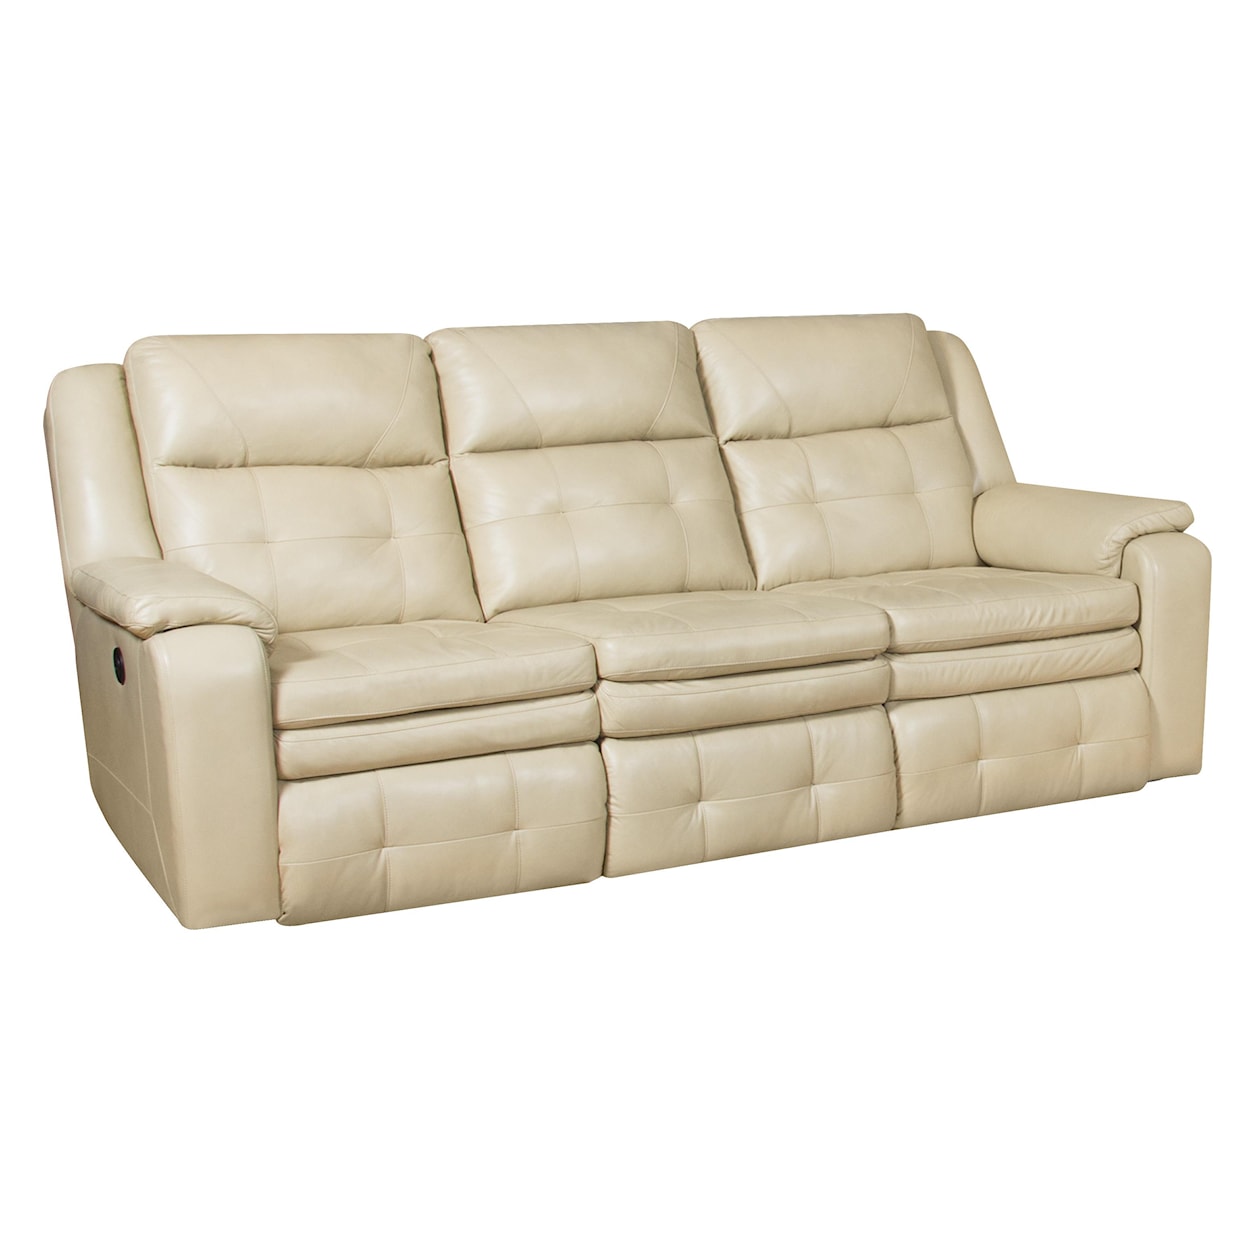 Southern Motion Inspire Double Reclining Sofa with Power Headrest